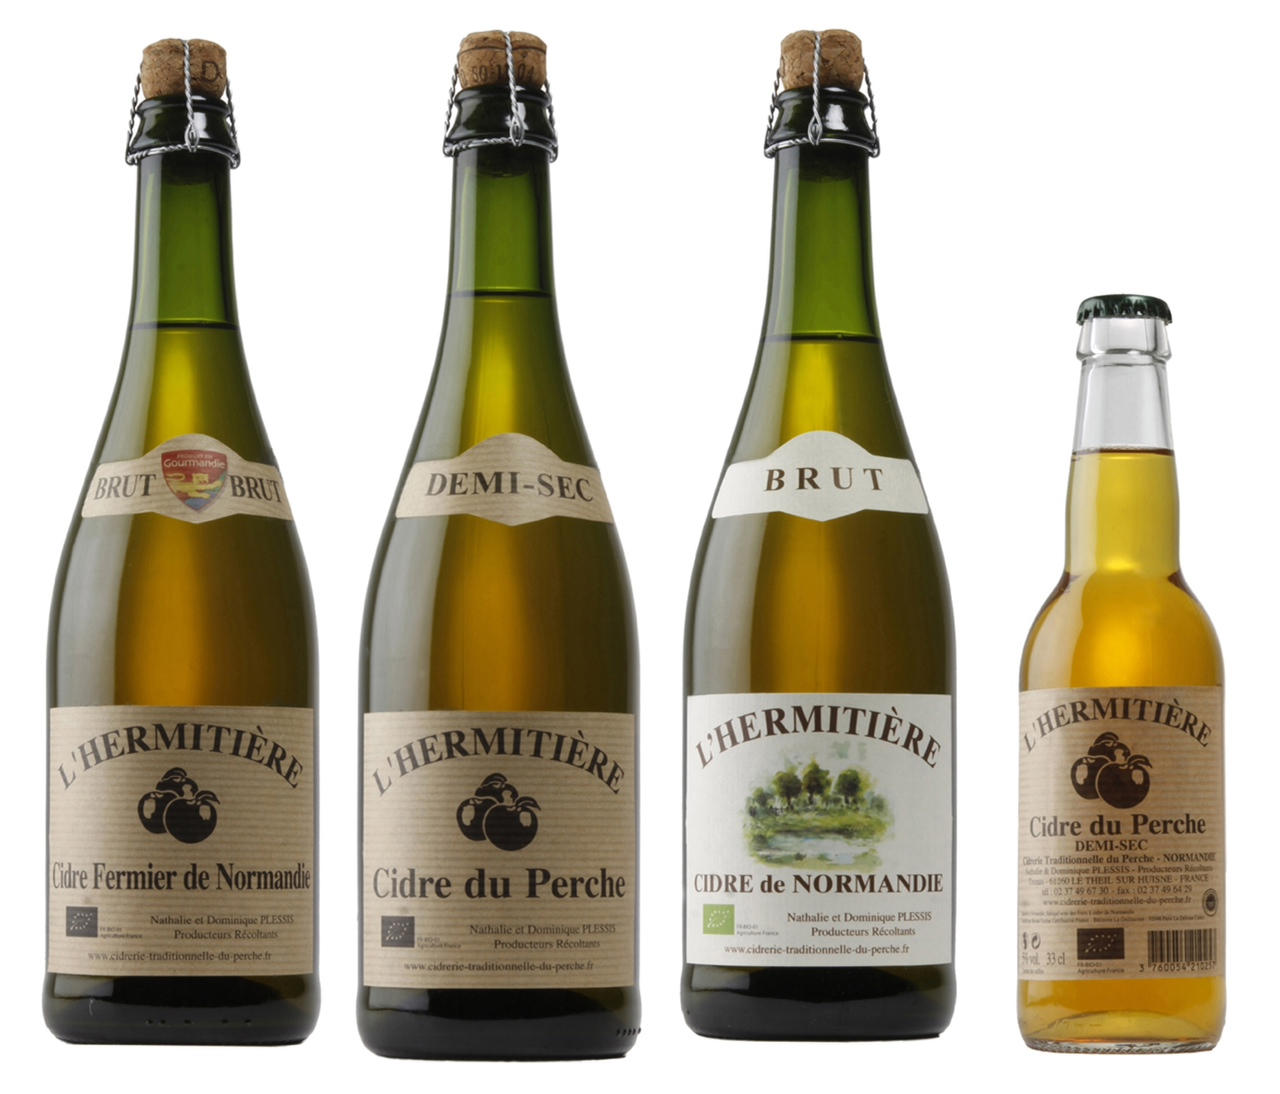 Ciders from Domaine Plessis are fermented a second time.